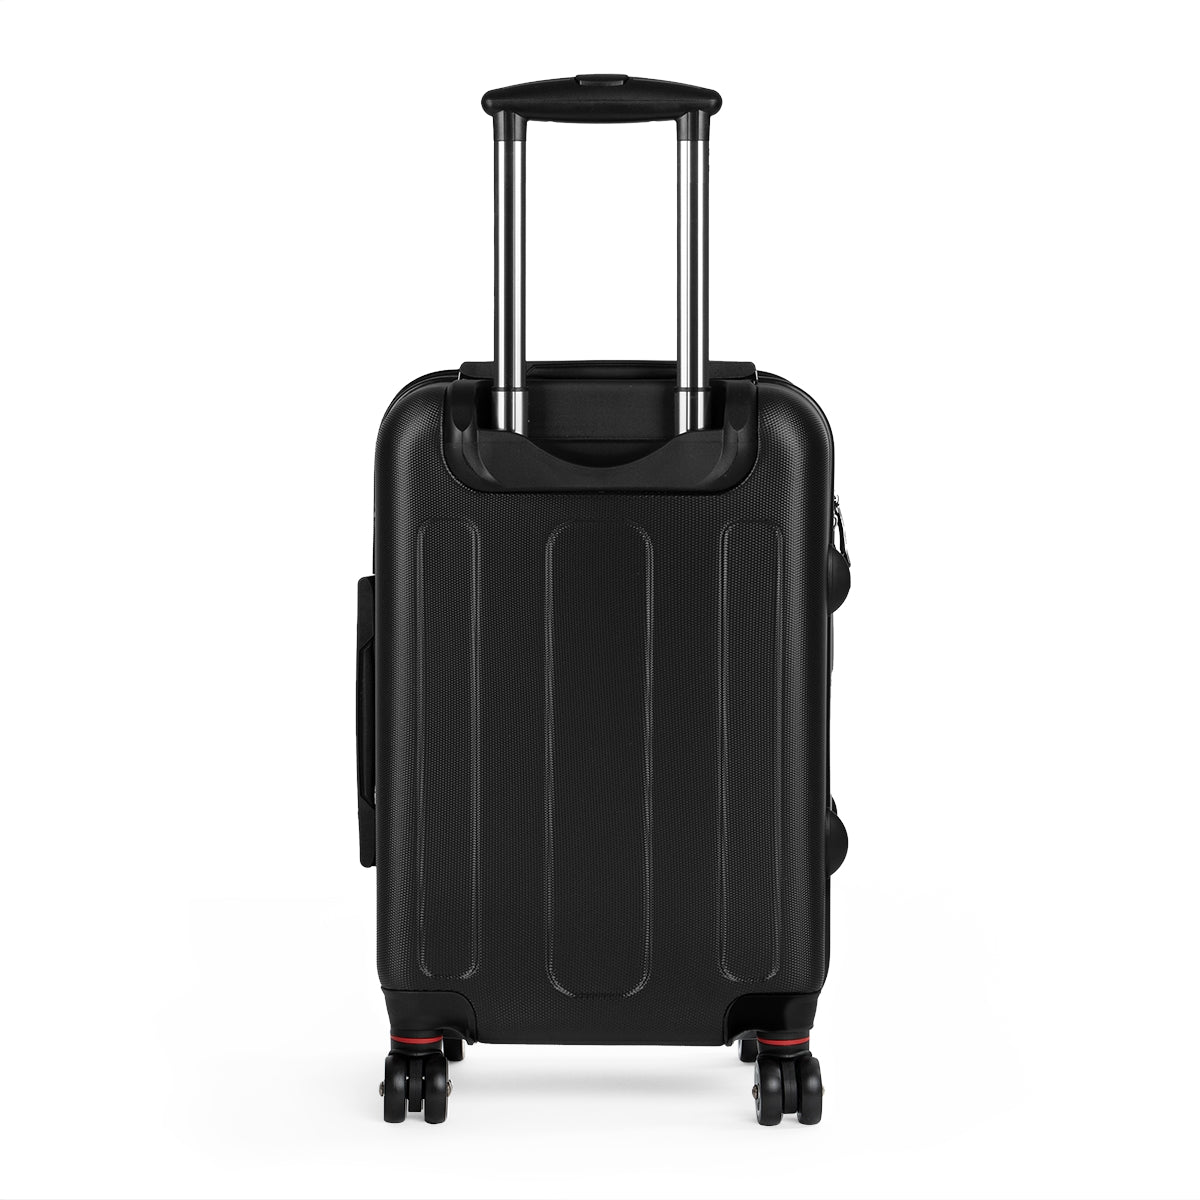 Getrott Coney Island Beach Aquarium Luna Park Governor Black Cabin Suitcase Inner Pockets Extended Storage Adjustable Telescopic Handle Inner Pockets Double wheeled Polycarbonate Hard-shell Built-in Lock